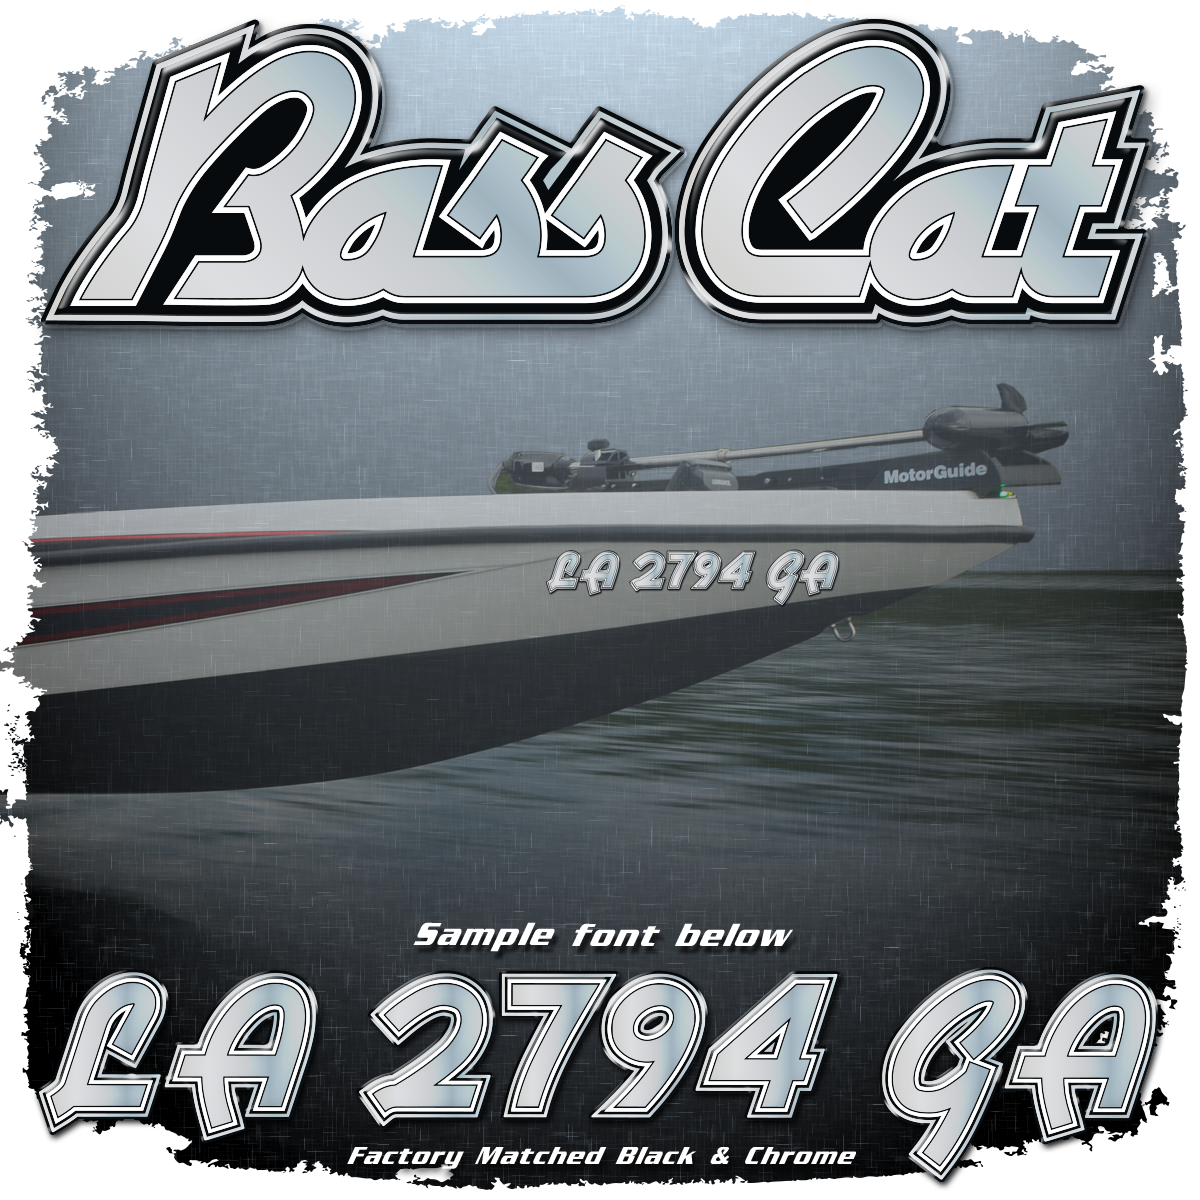 Bass Cat Registration (2 included), Factory Matched